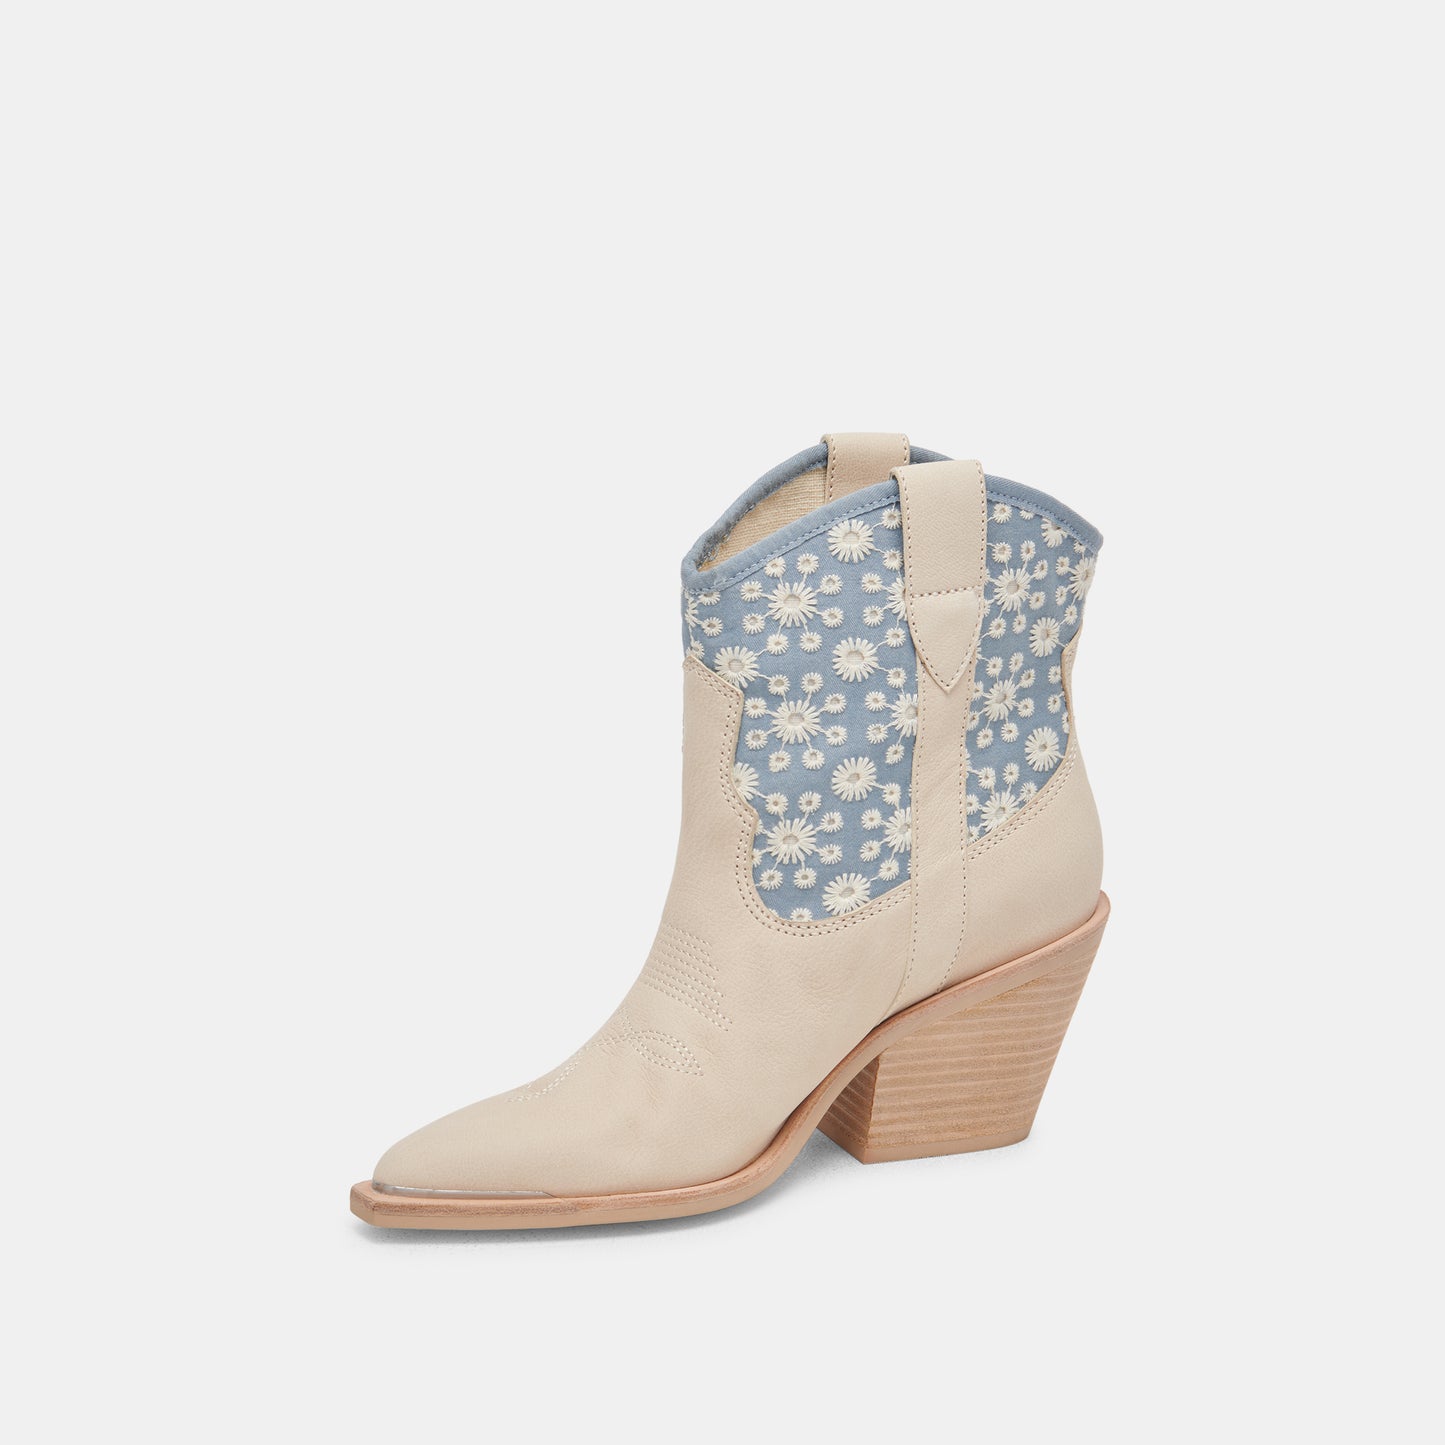 NASHE BOOTIES BLUE FLORAL NUBUCK